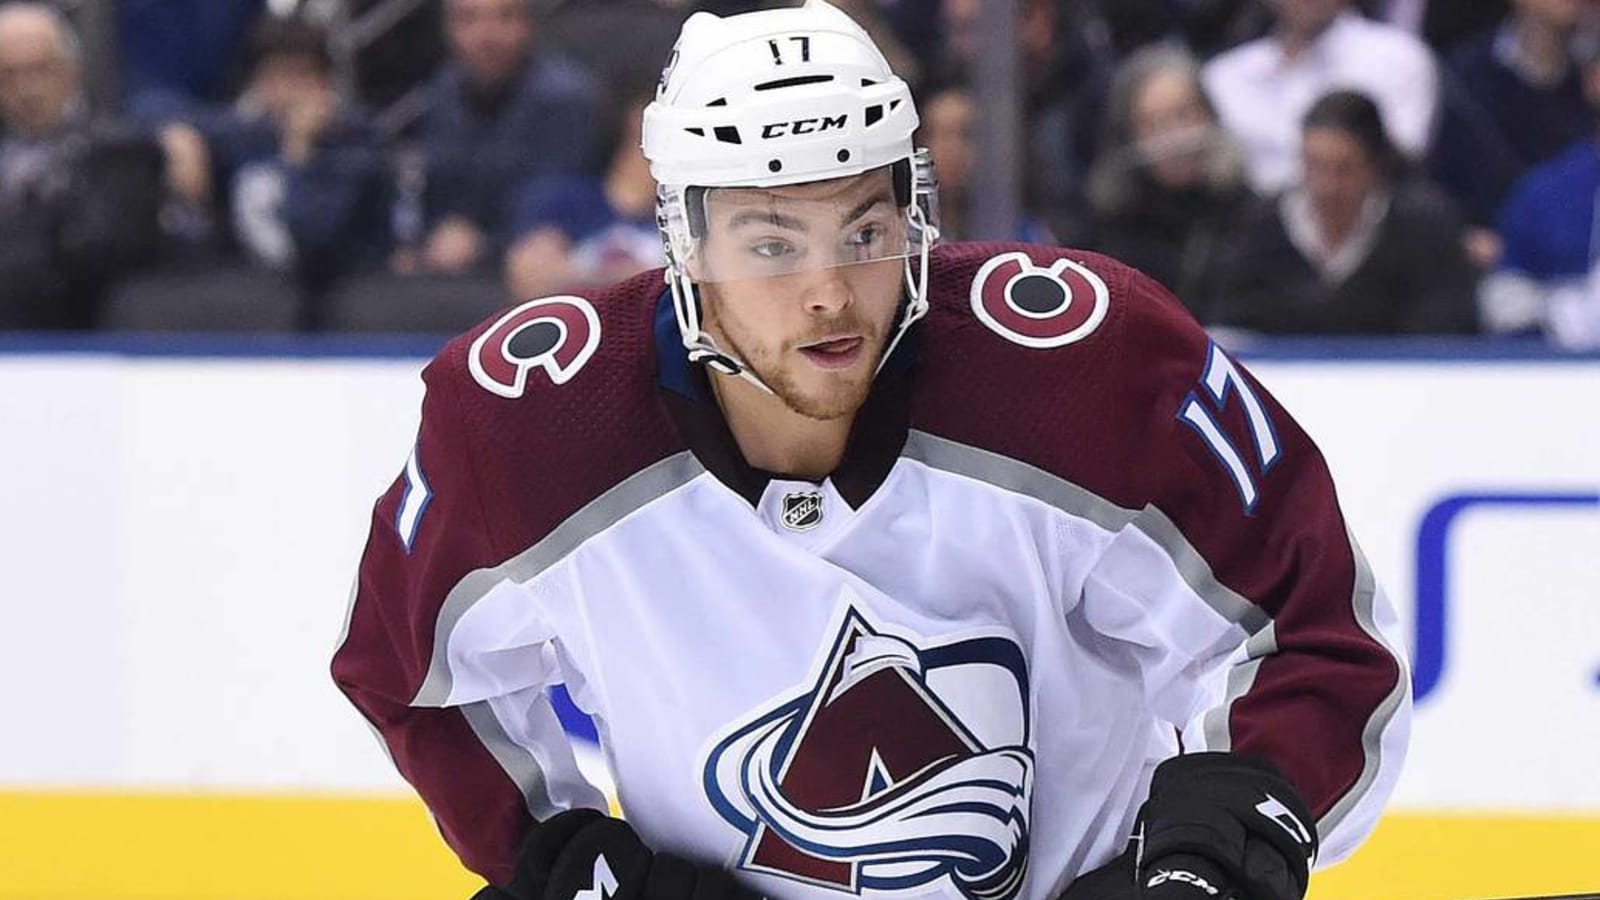 Avalanche prospect Tyson Jost out 'extended period' after big hit